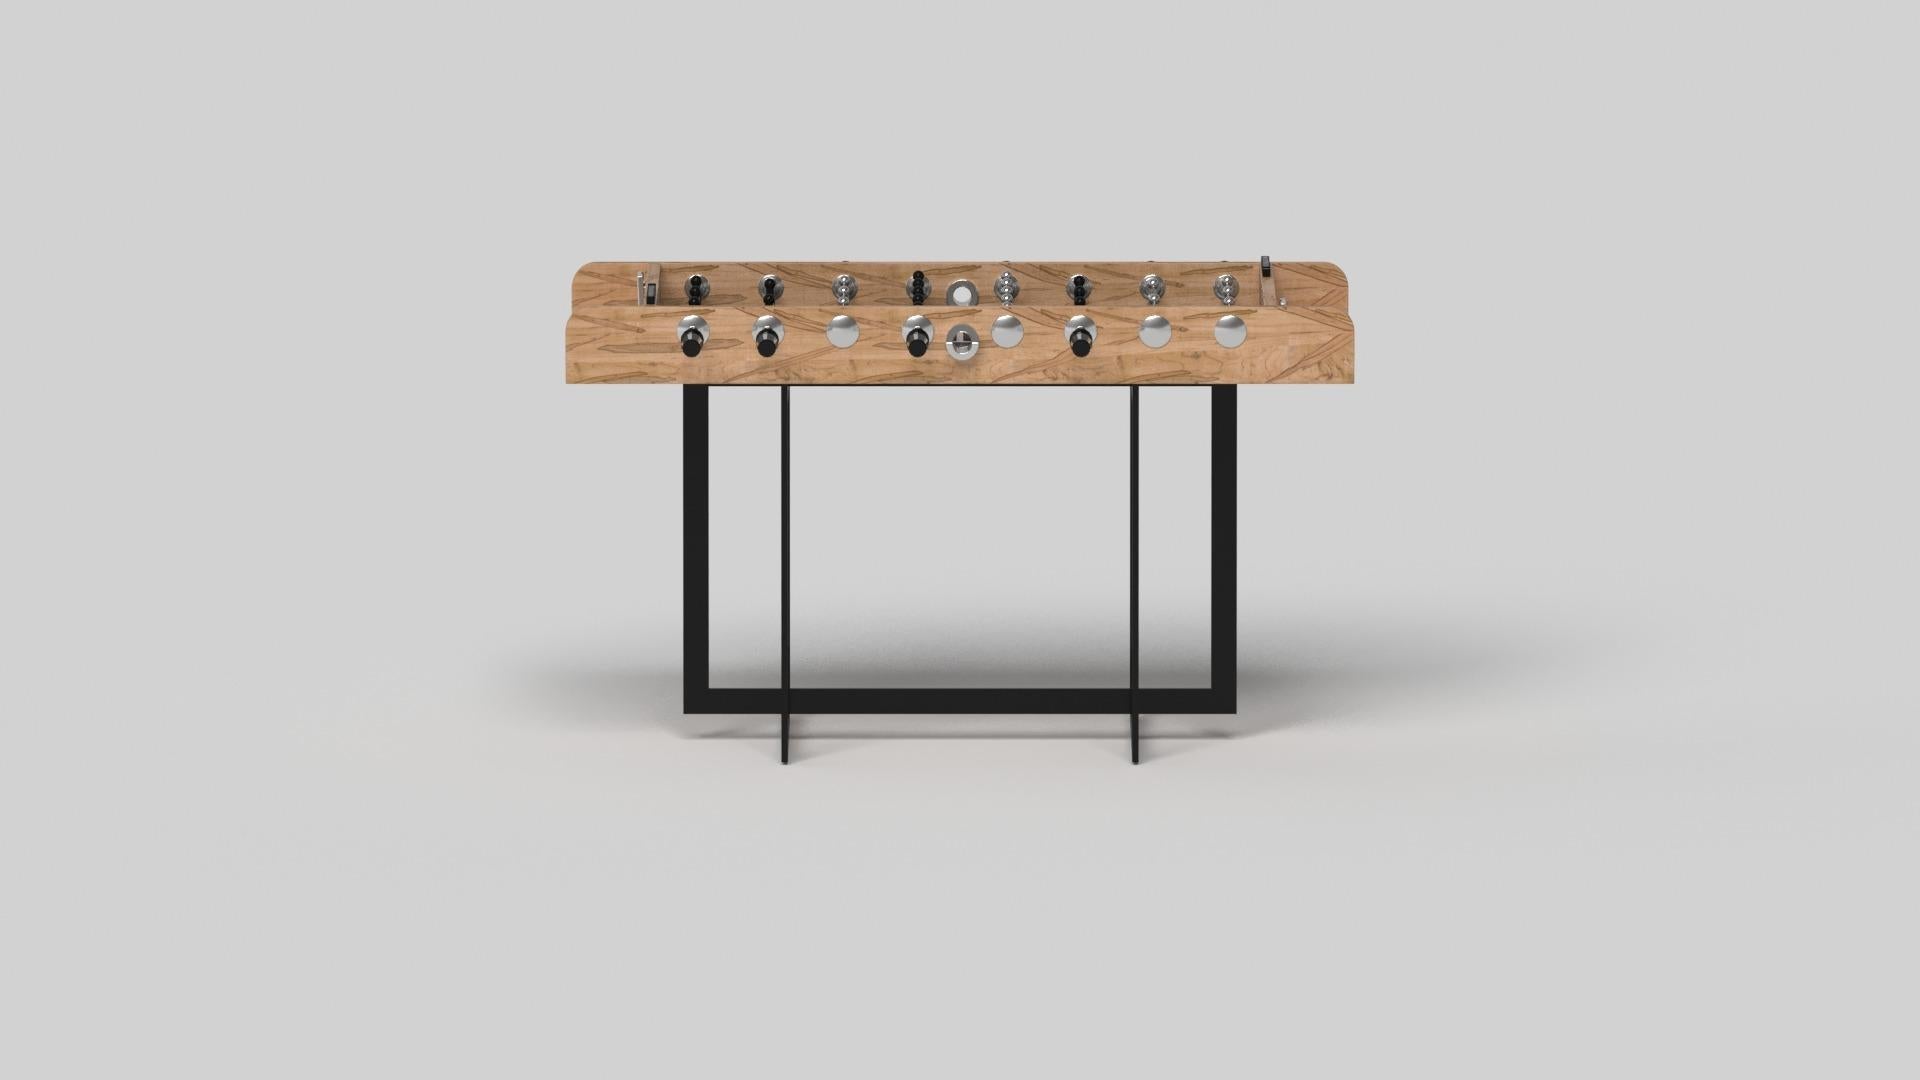 With an open metal foundation, our Beso table is a unique expression of contemporary forms and negative space. This foosball table is handcrafted by our master artisans with a rectangle-in-rectangle base that echoes the angles and edges of a